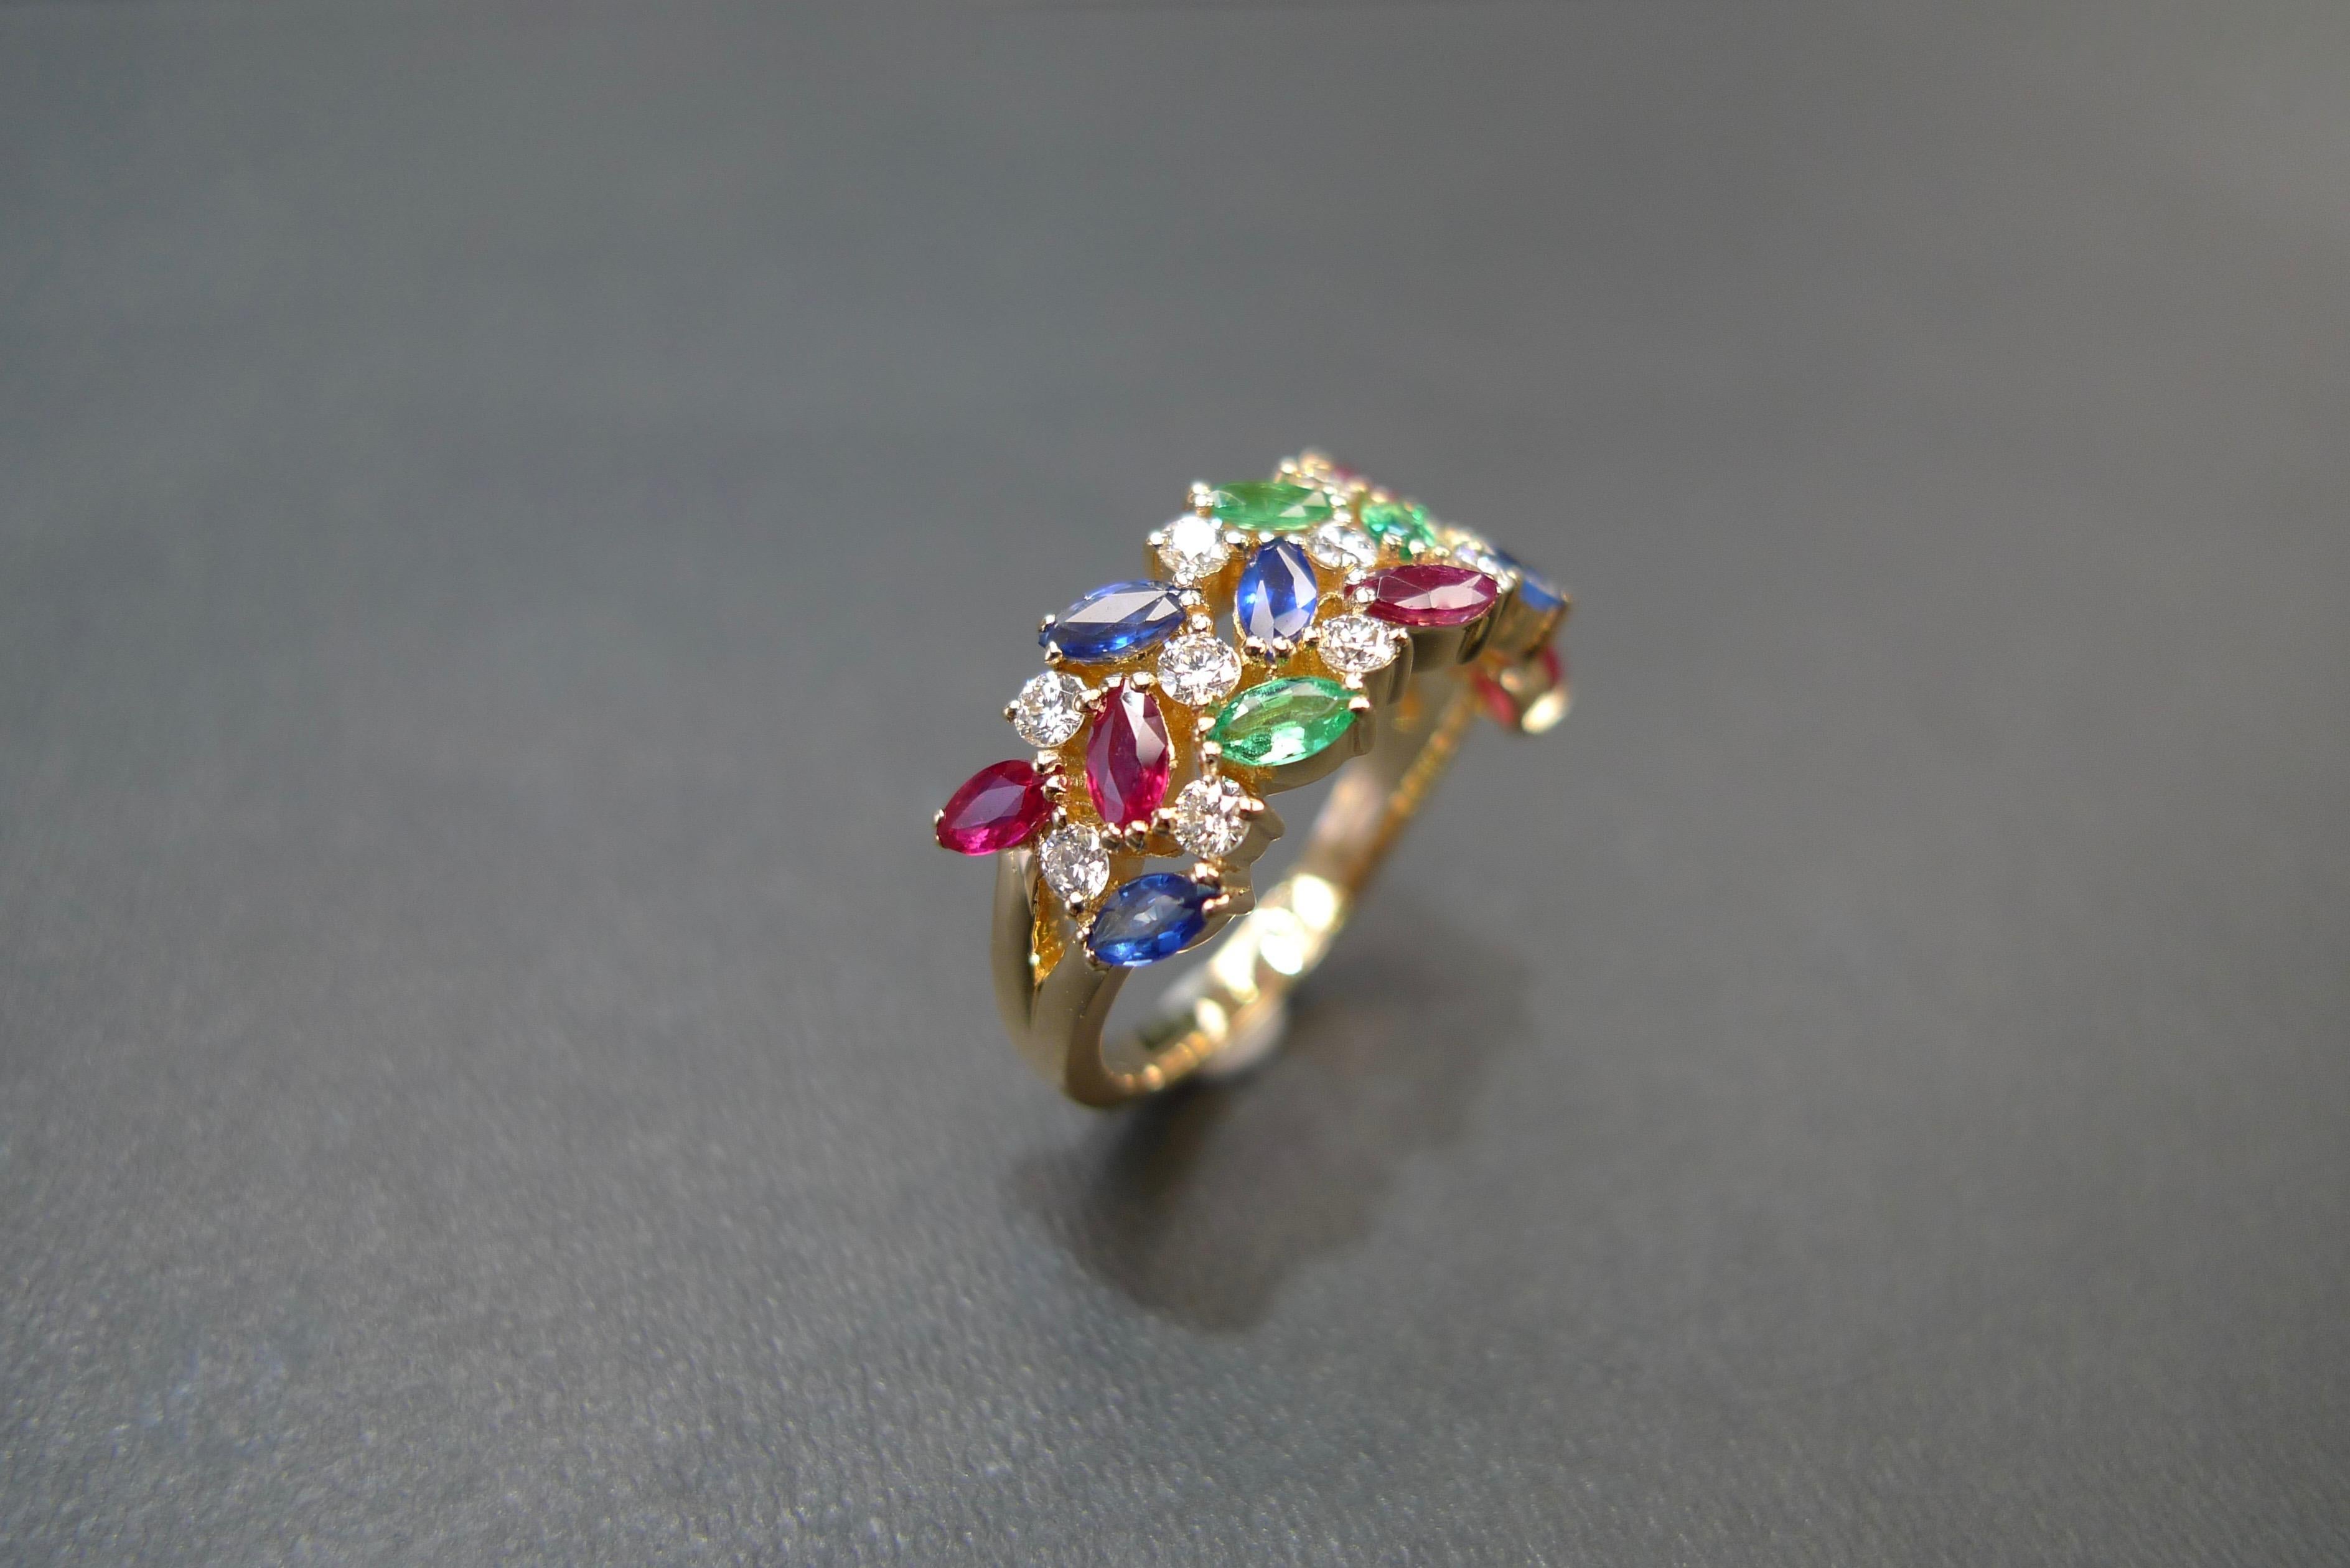 For Sale:  Vintage Style Wedding Ring Three Rows Blue Sapphire, Ruby, Emerald and Diamond  5